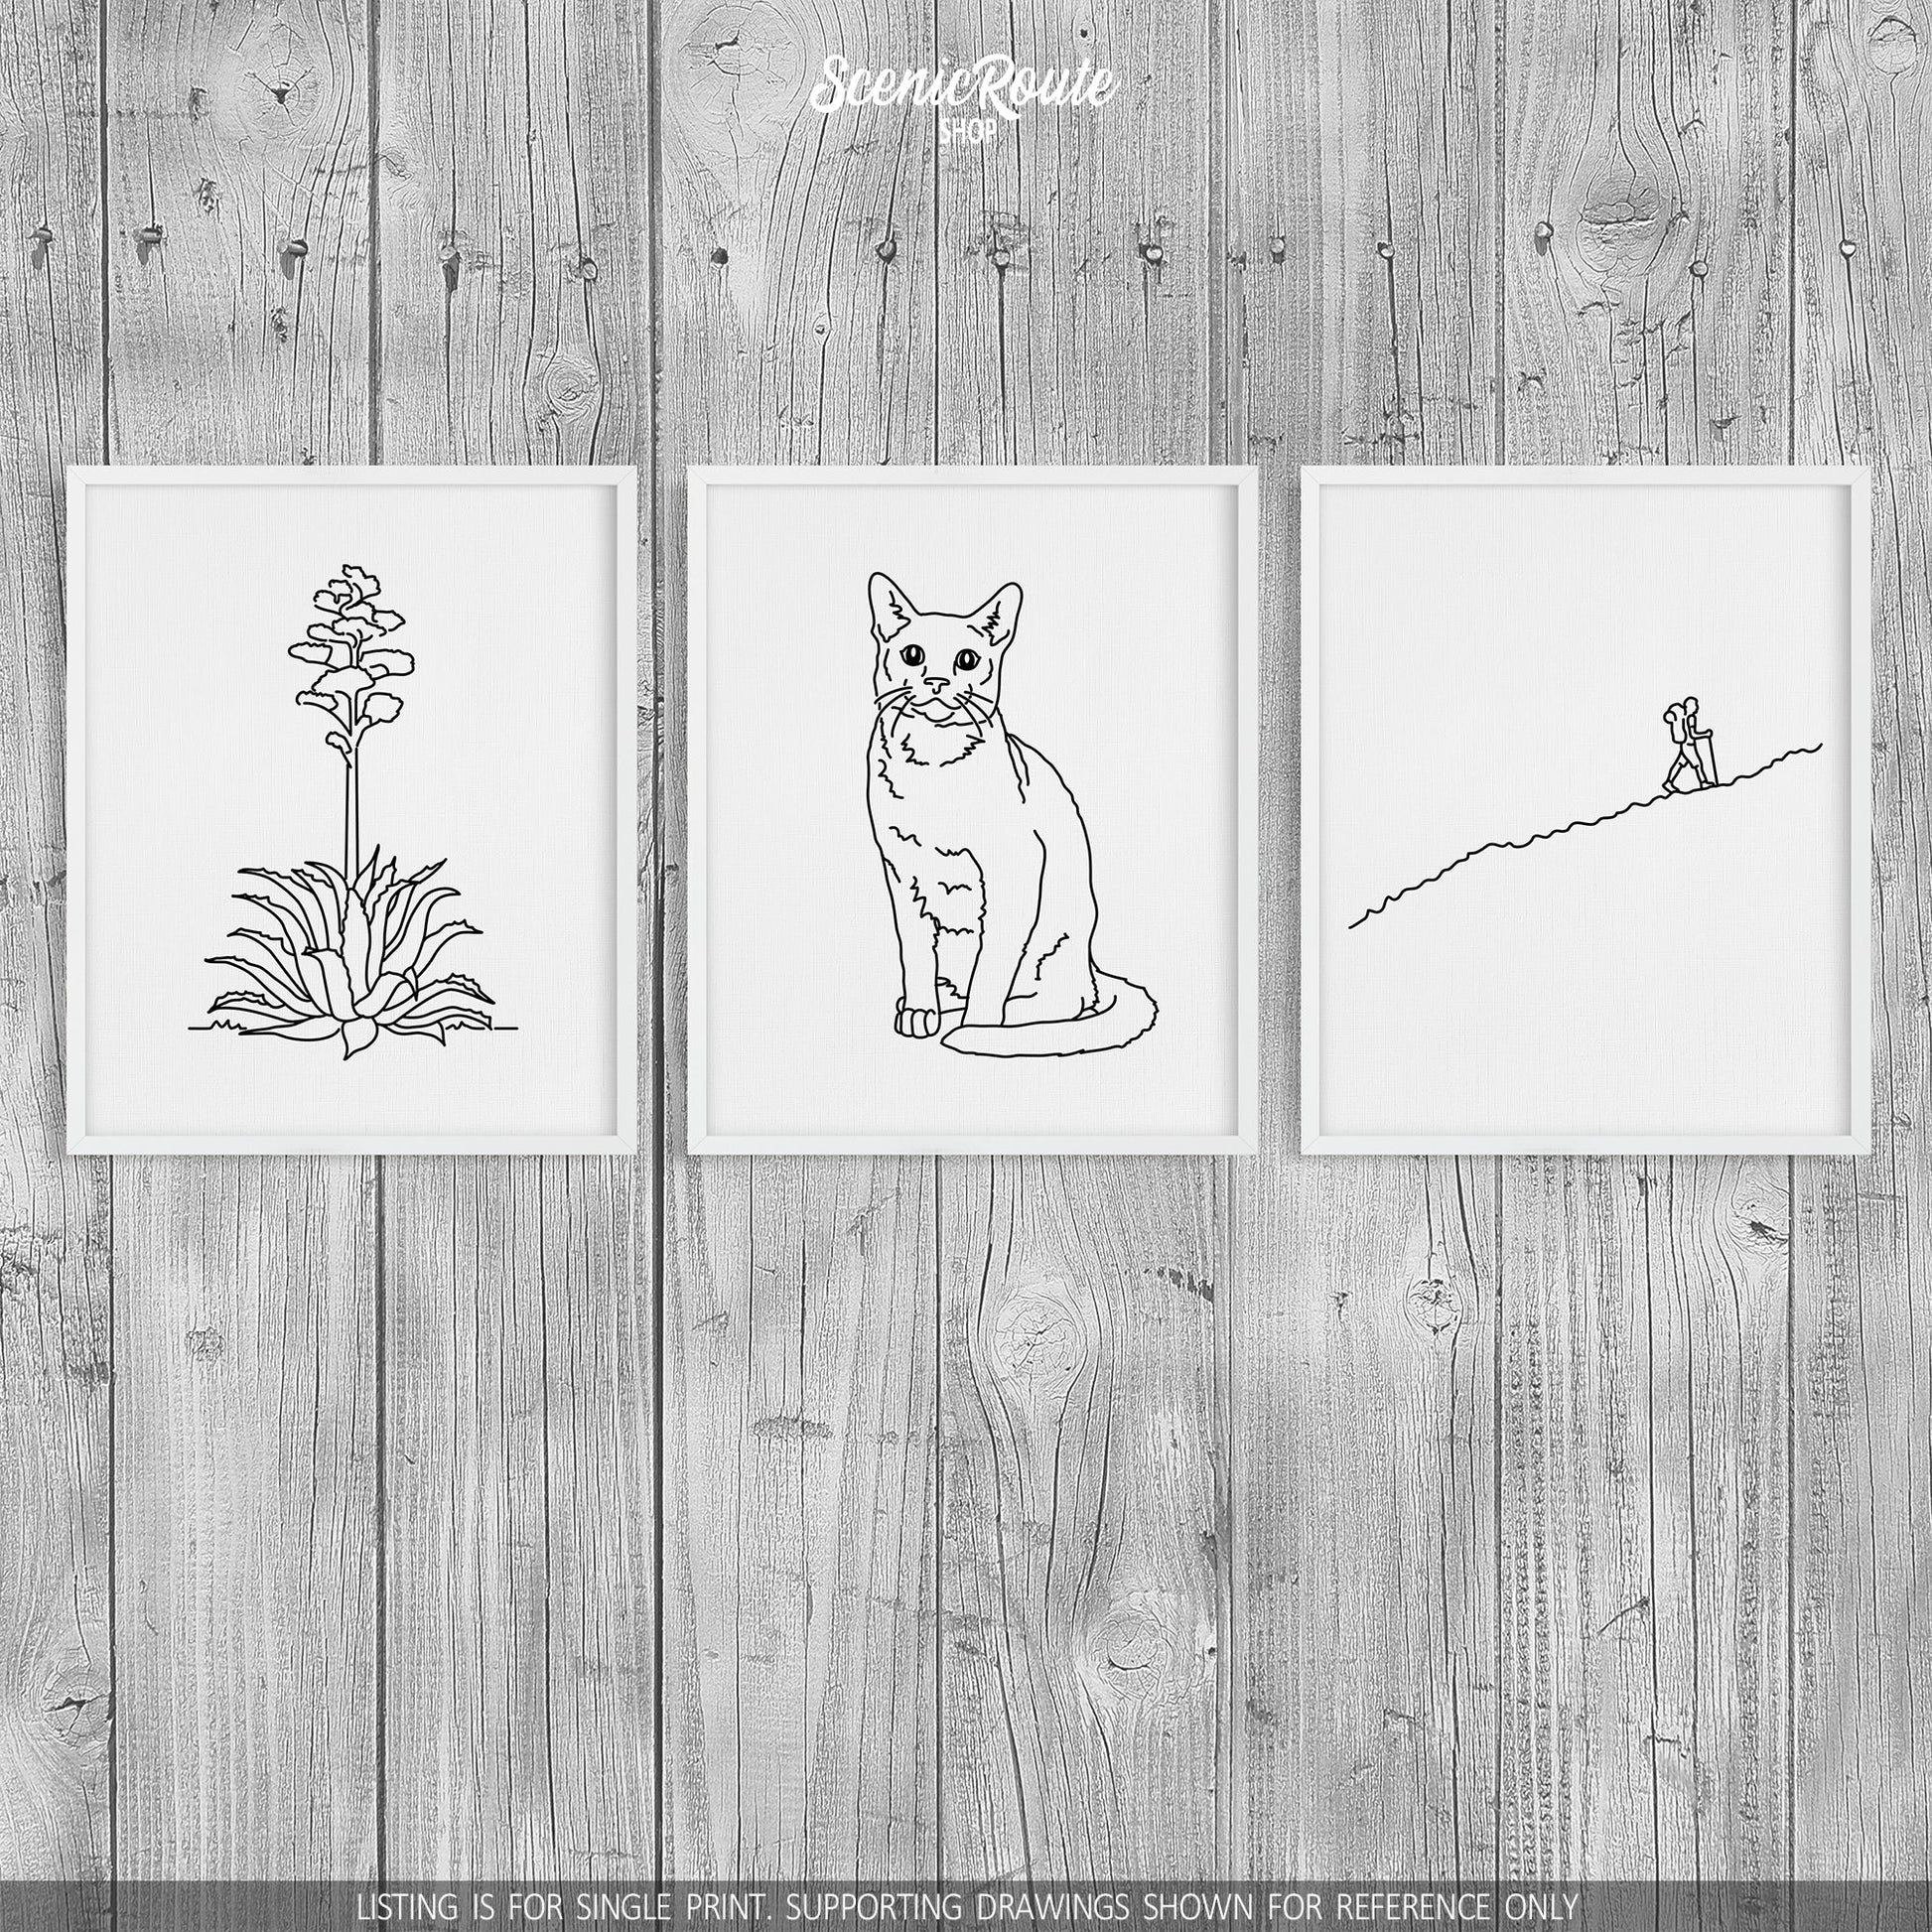 A group of three framed drawings on a wood wall. The line art drawings include a Century Plant, a Russian Blue cat, and a person Hiking